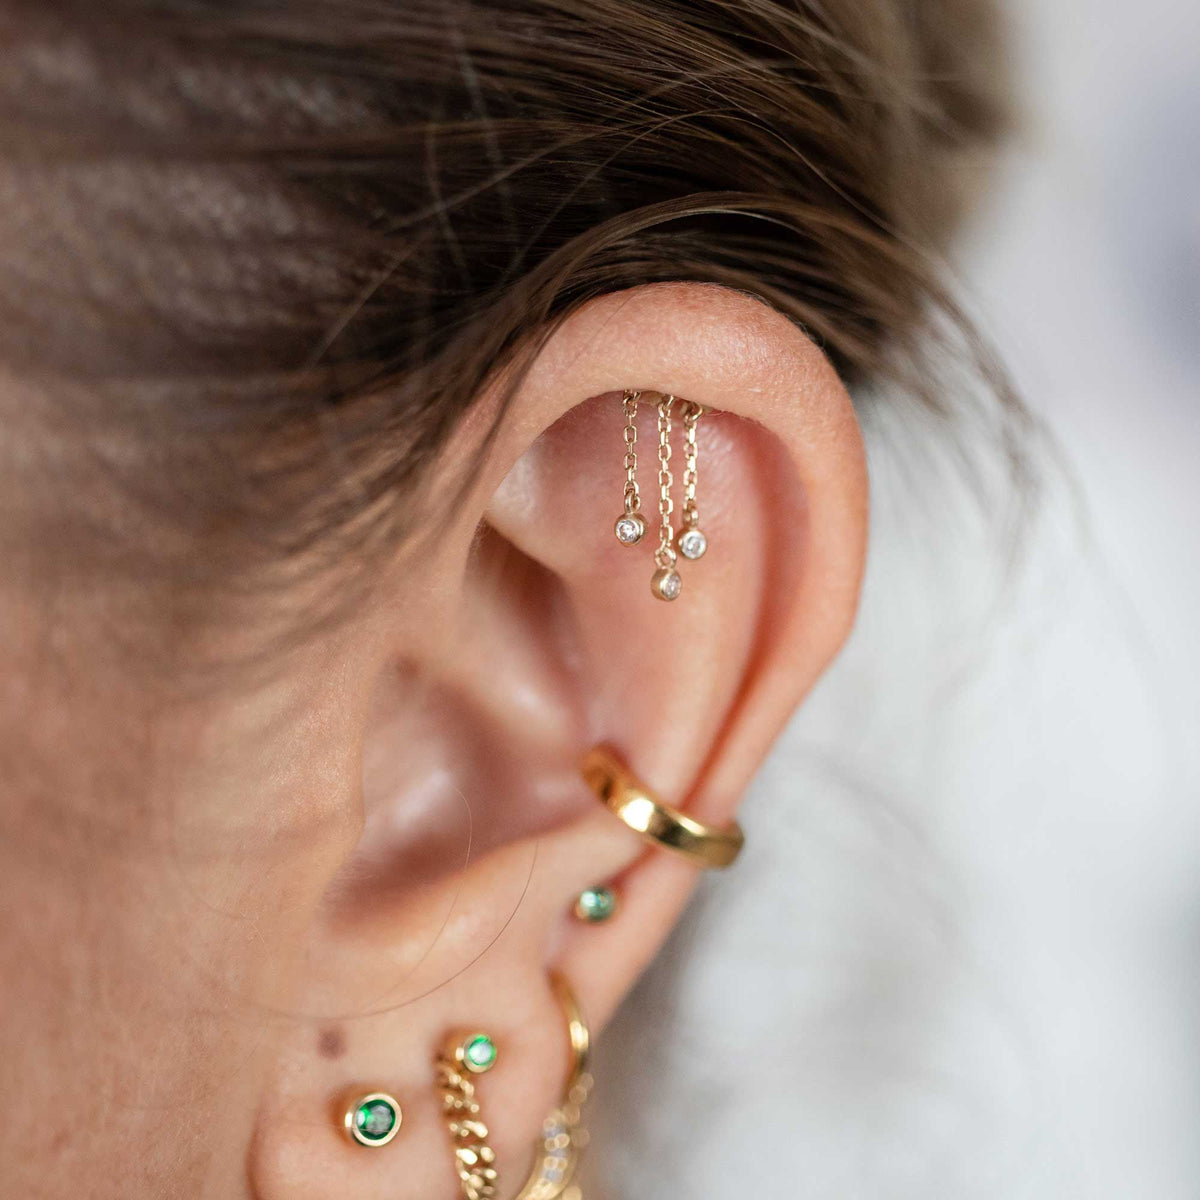 Yellow Gold Studs Triple Crystal Floating Helix Earring The Curated Lobe14k gold14k gold topbestseller